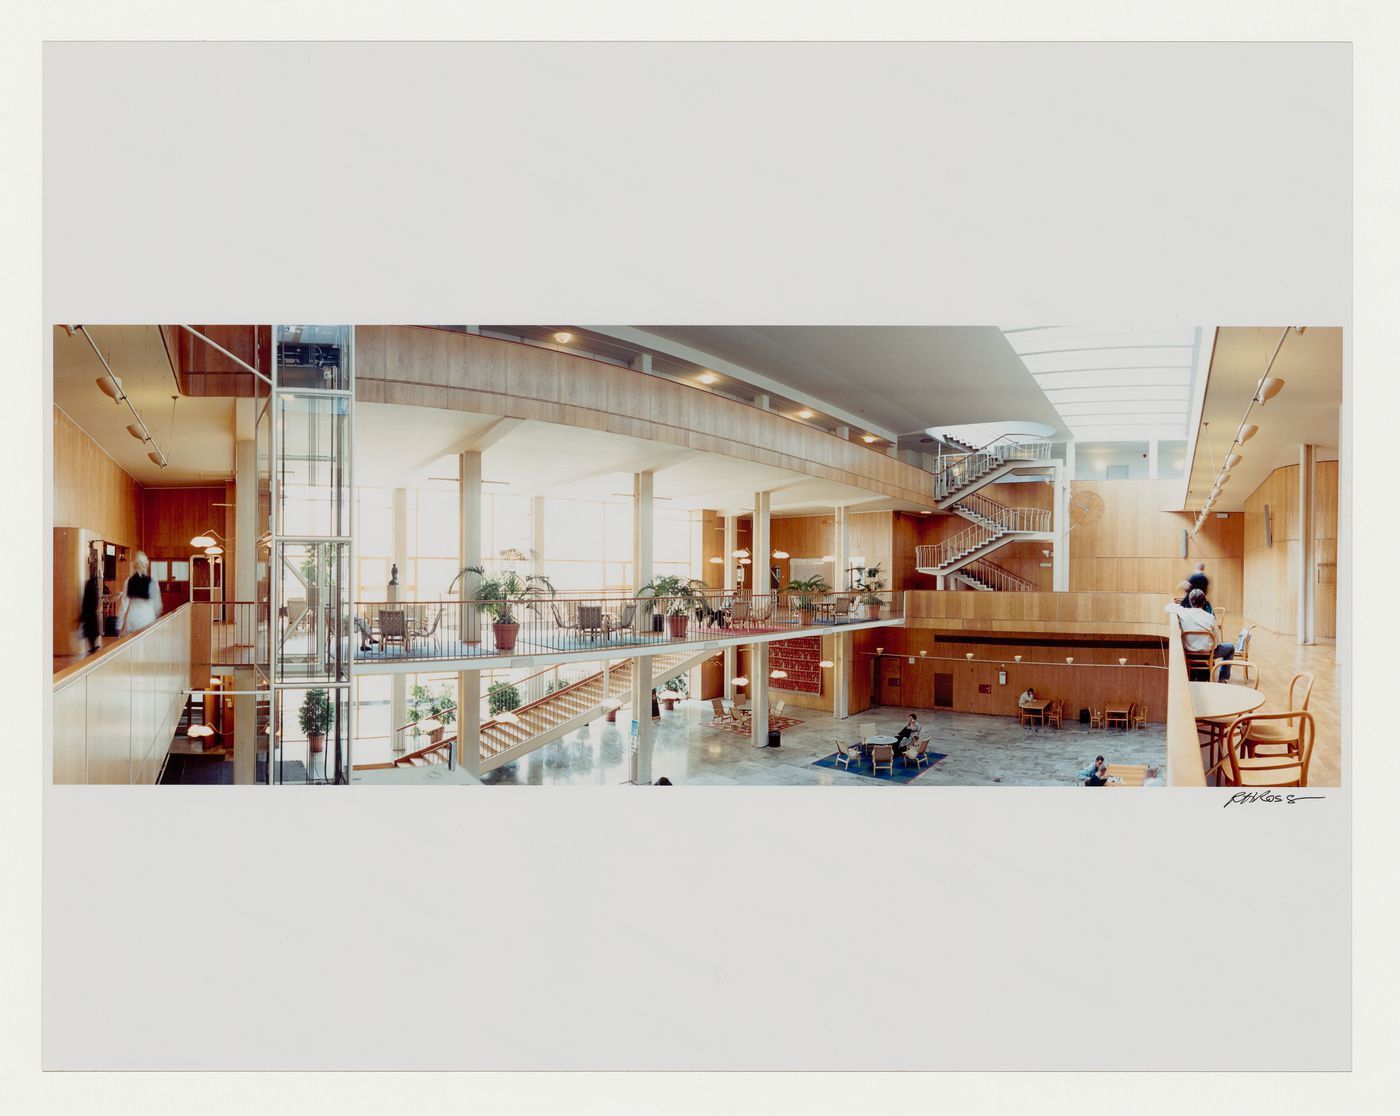 View of the main hall and first floor looking towards the entrance and staircases and showing the glass wall onto the courtyard, Göteborgs rådhusets tillbyggnad [courthouse annex], Göteborg, Sweden